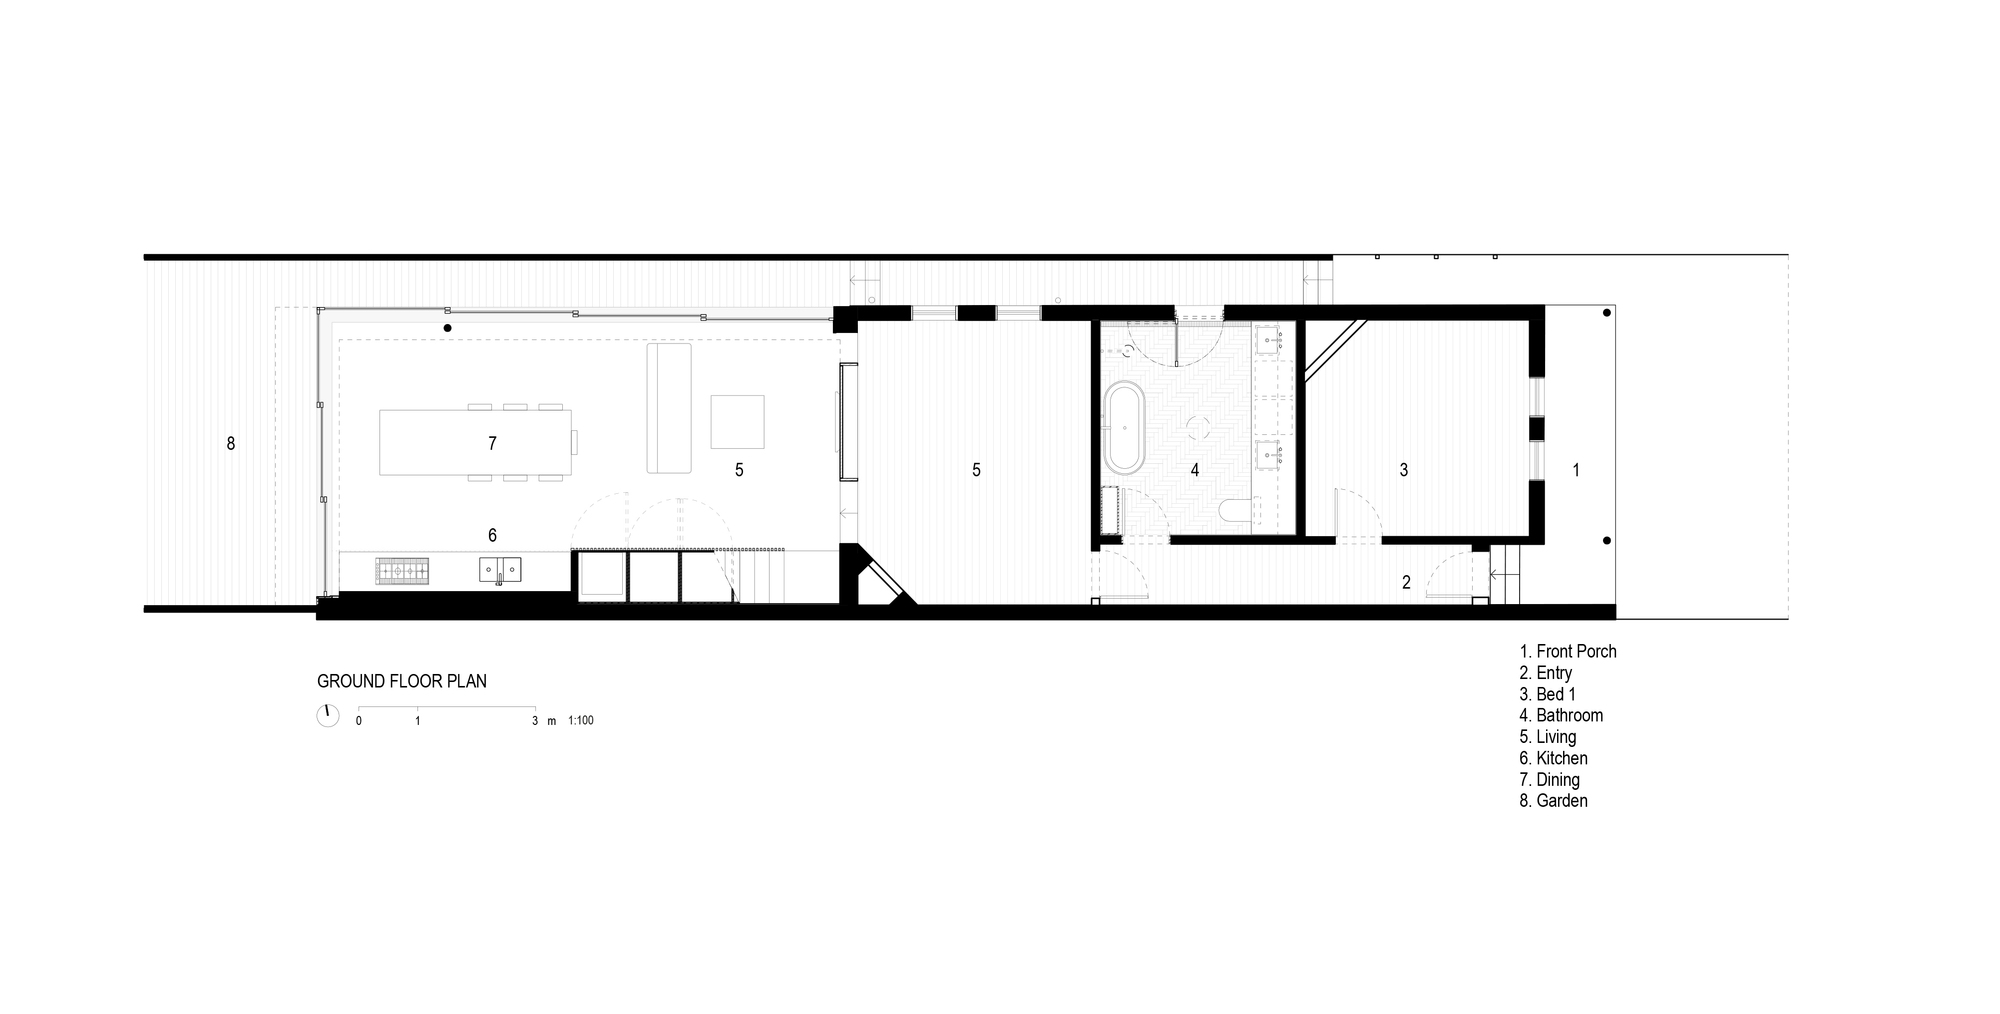 Floor plan of the ground level of the revamped Bronte House